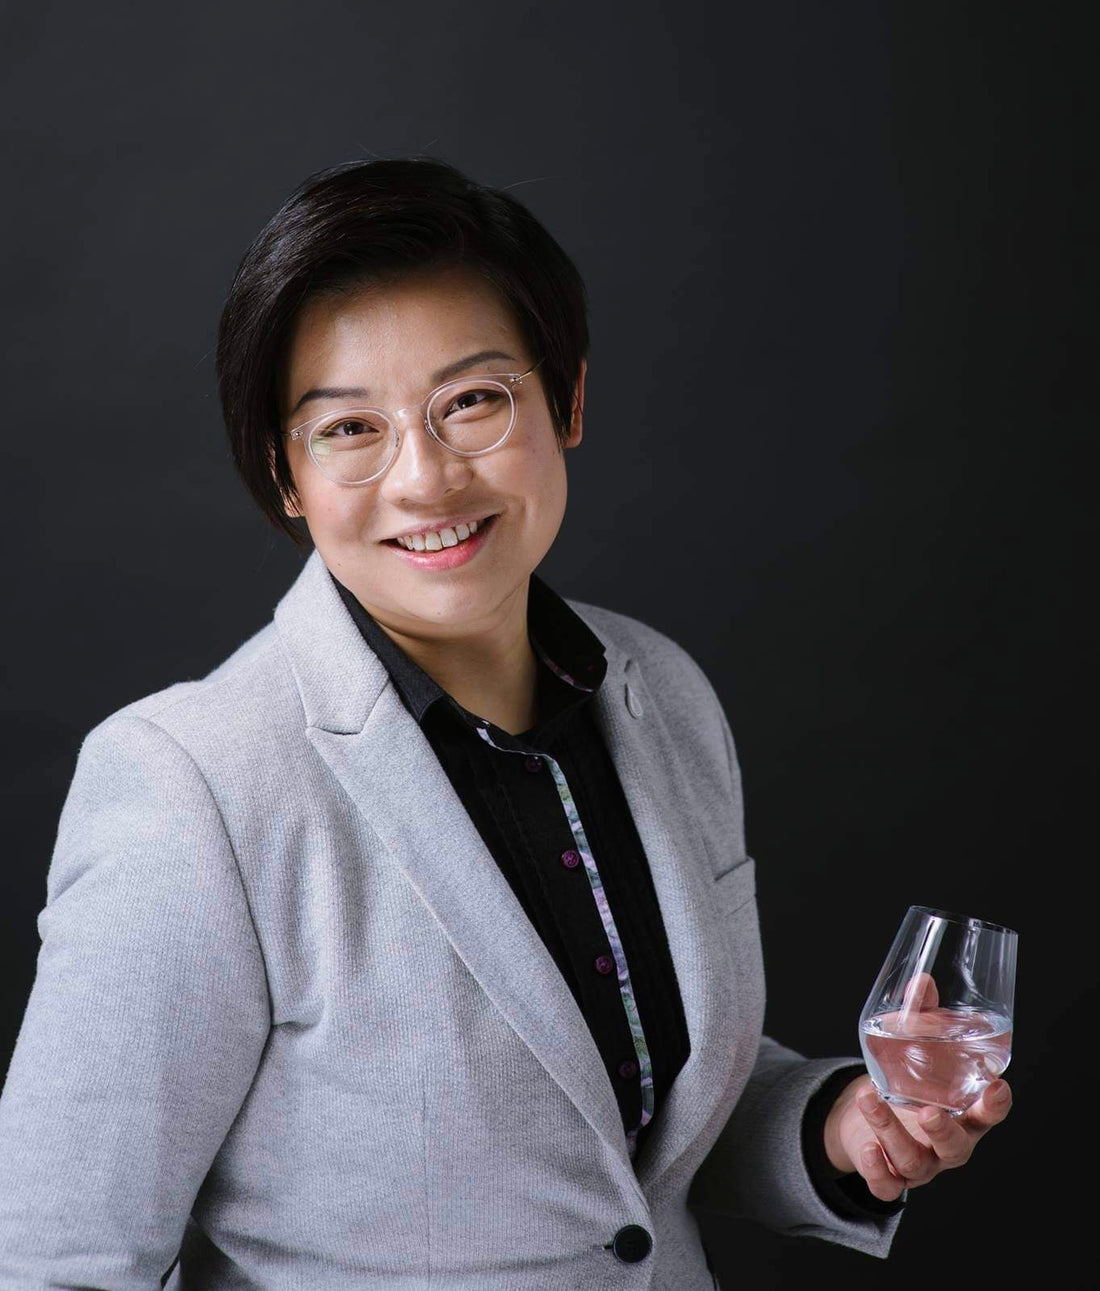 Tap, still or Sparkling? Canada's first Water Sommelier on what's in our drinking water